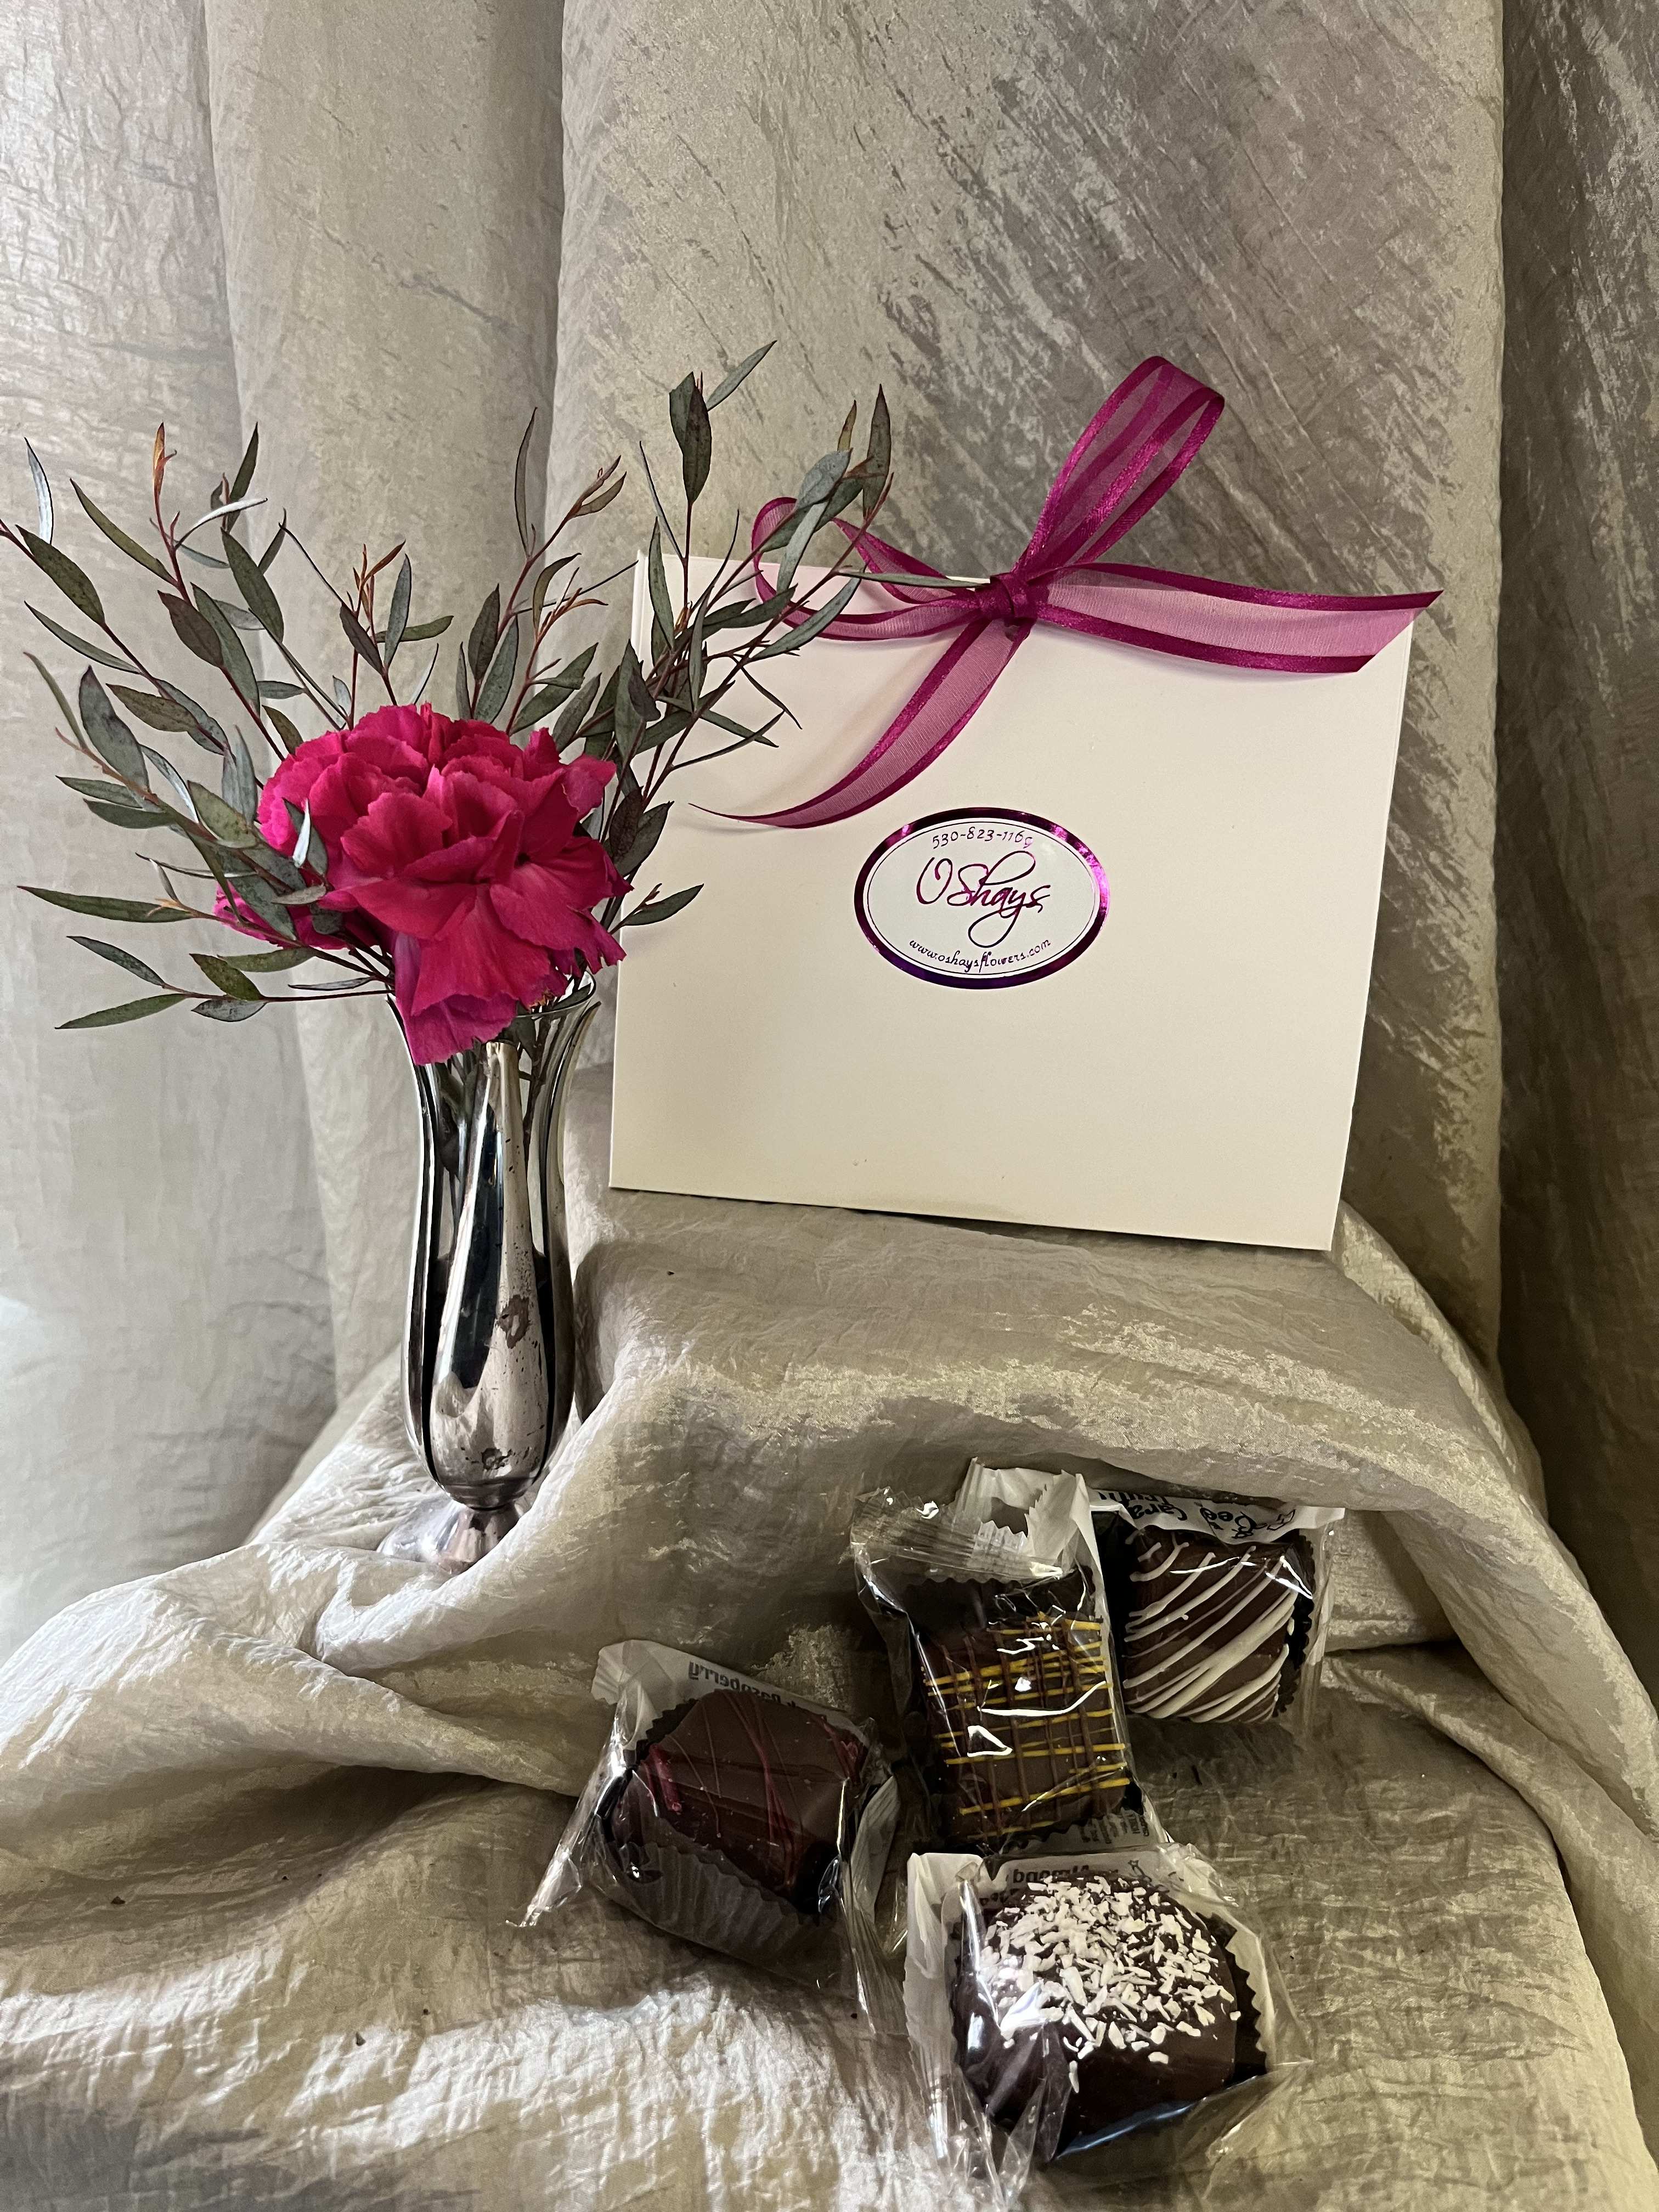 Queen Bee Chocolate  - Queen Bee chocolate Truffles  Ranging in a variety of flavors Made with real honey . You can either do a bag of 3 for 12.99 or a bag of 5 for 19.99 or as many as you desire to add on! (*Note the  Florals  pictured not included  in price) 